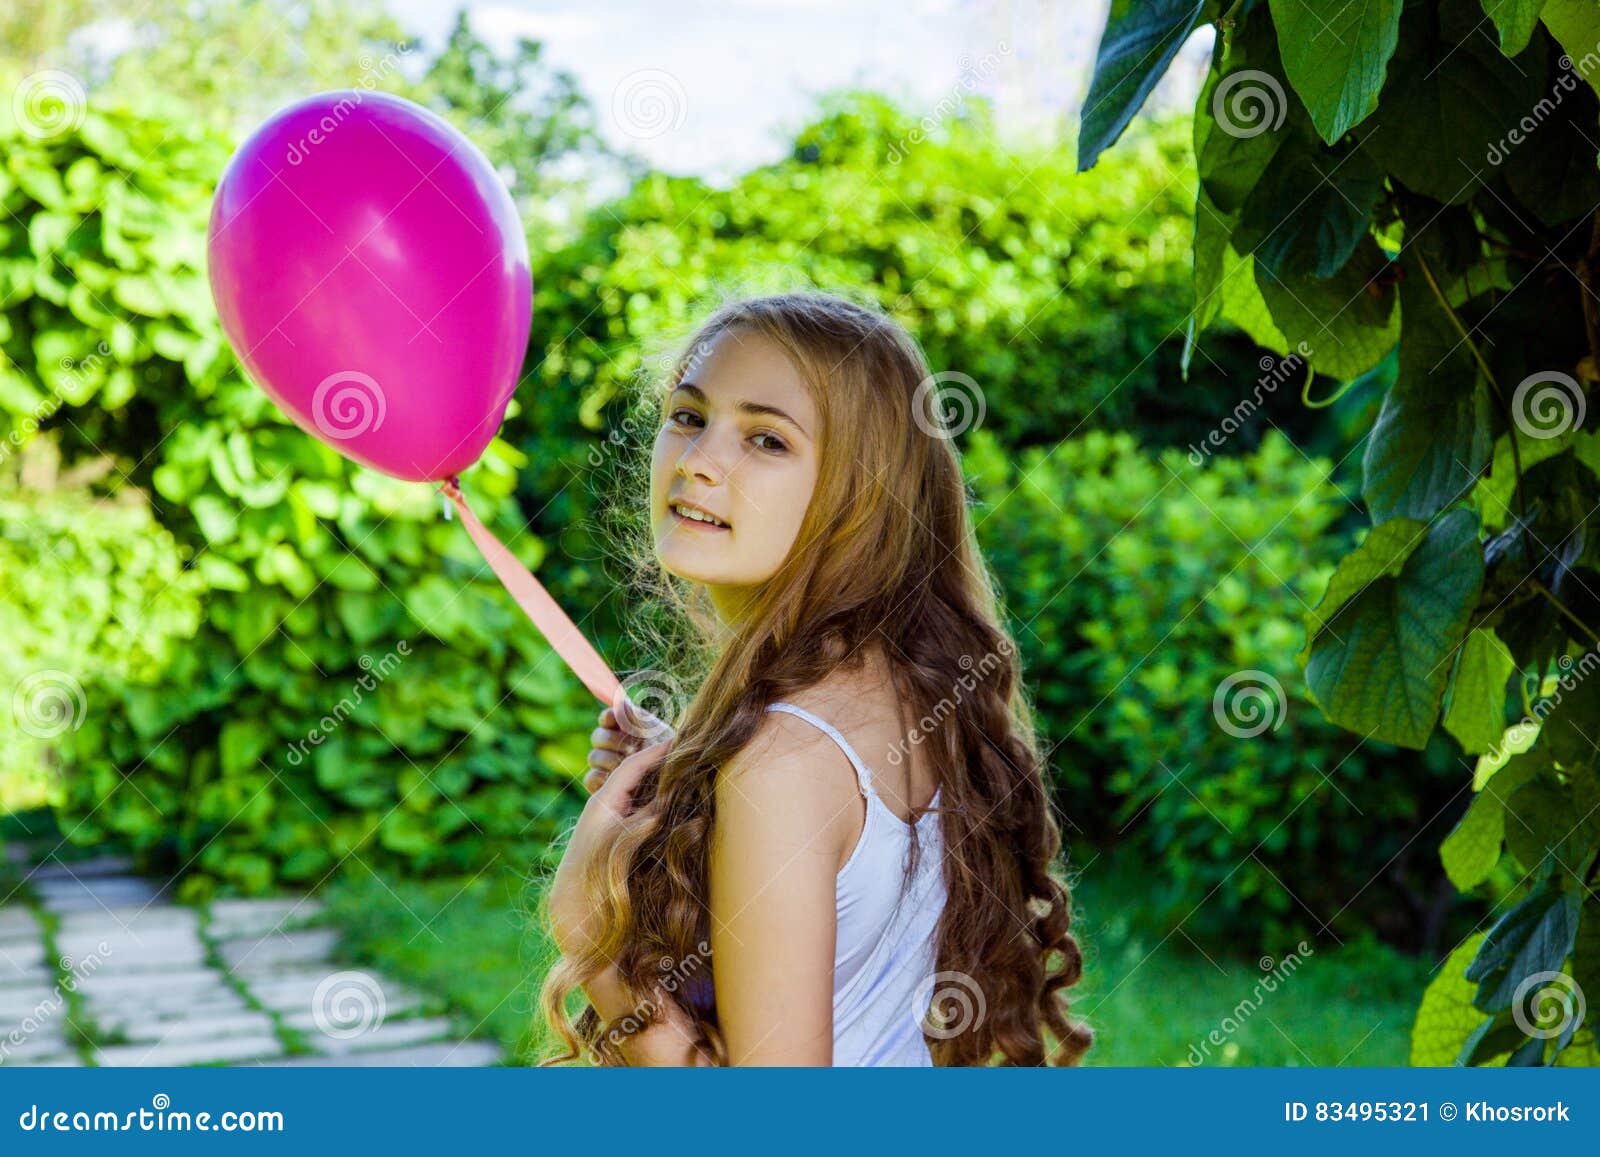 beautiful girl with balloon have a fun in the park.